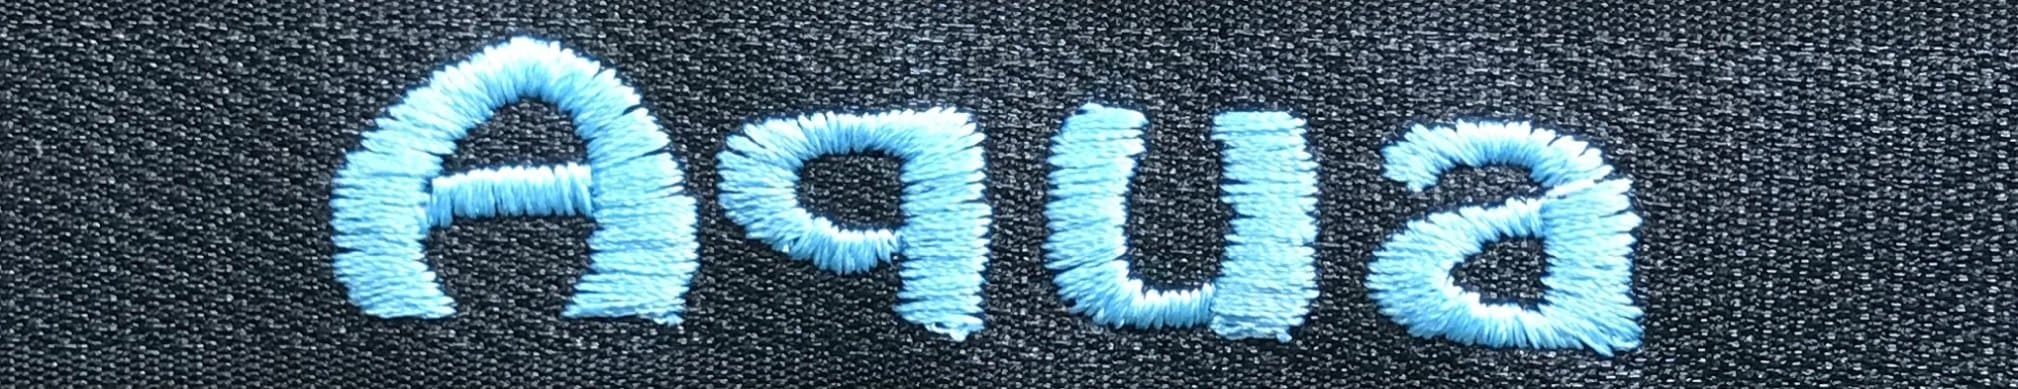 example of embroidery in aqua